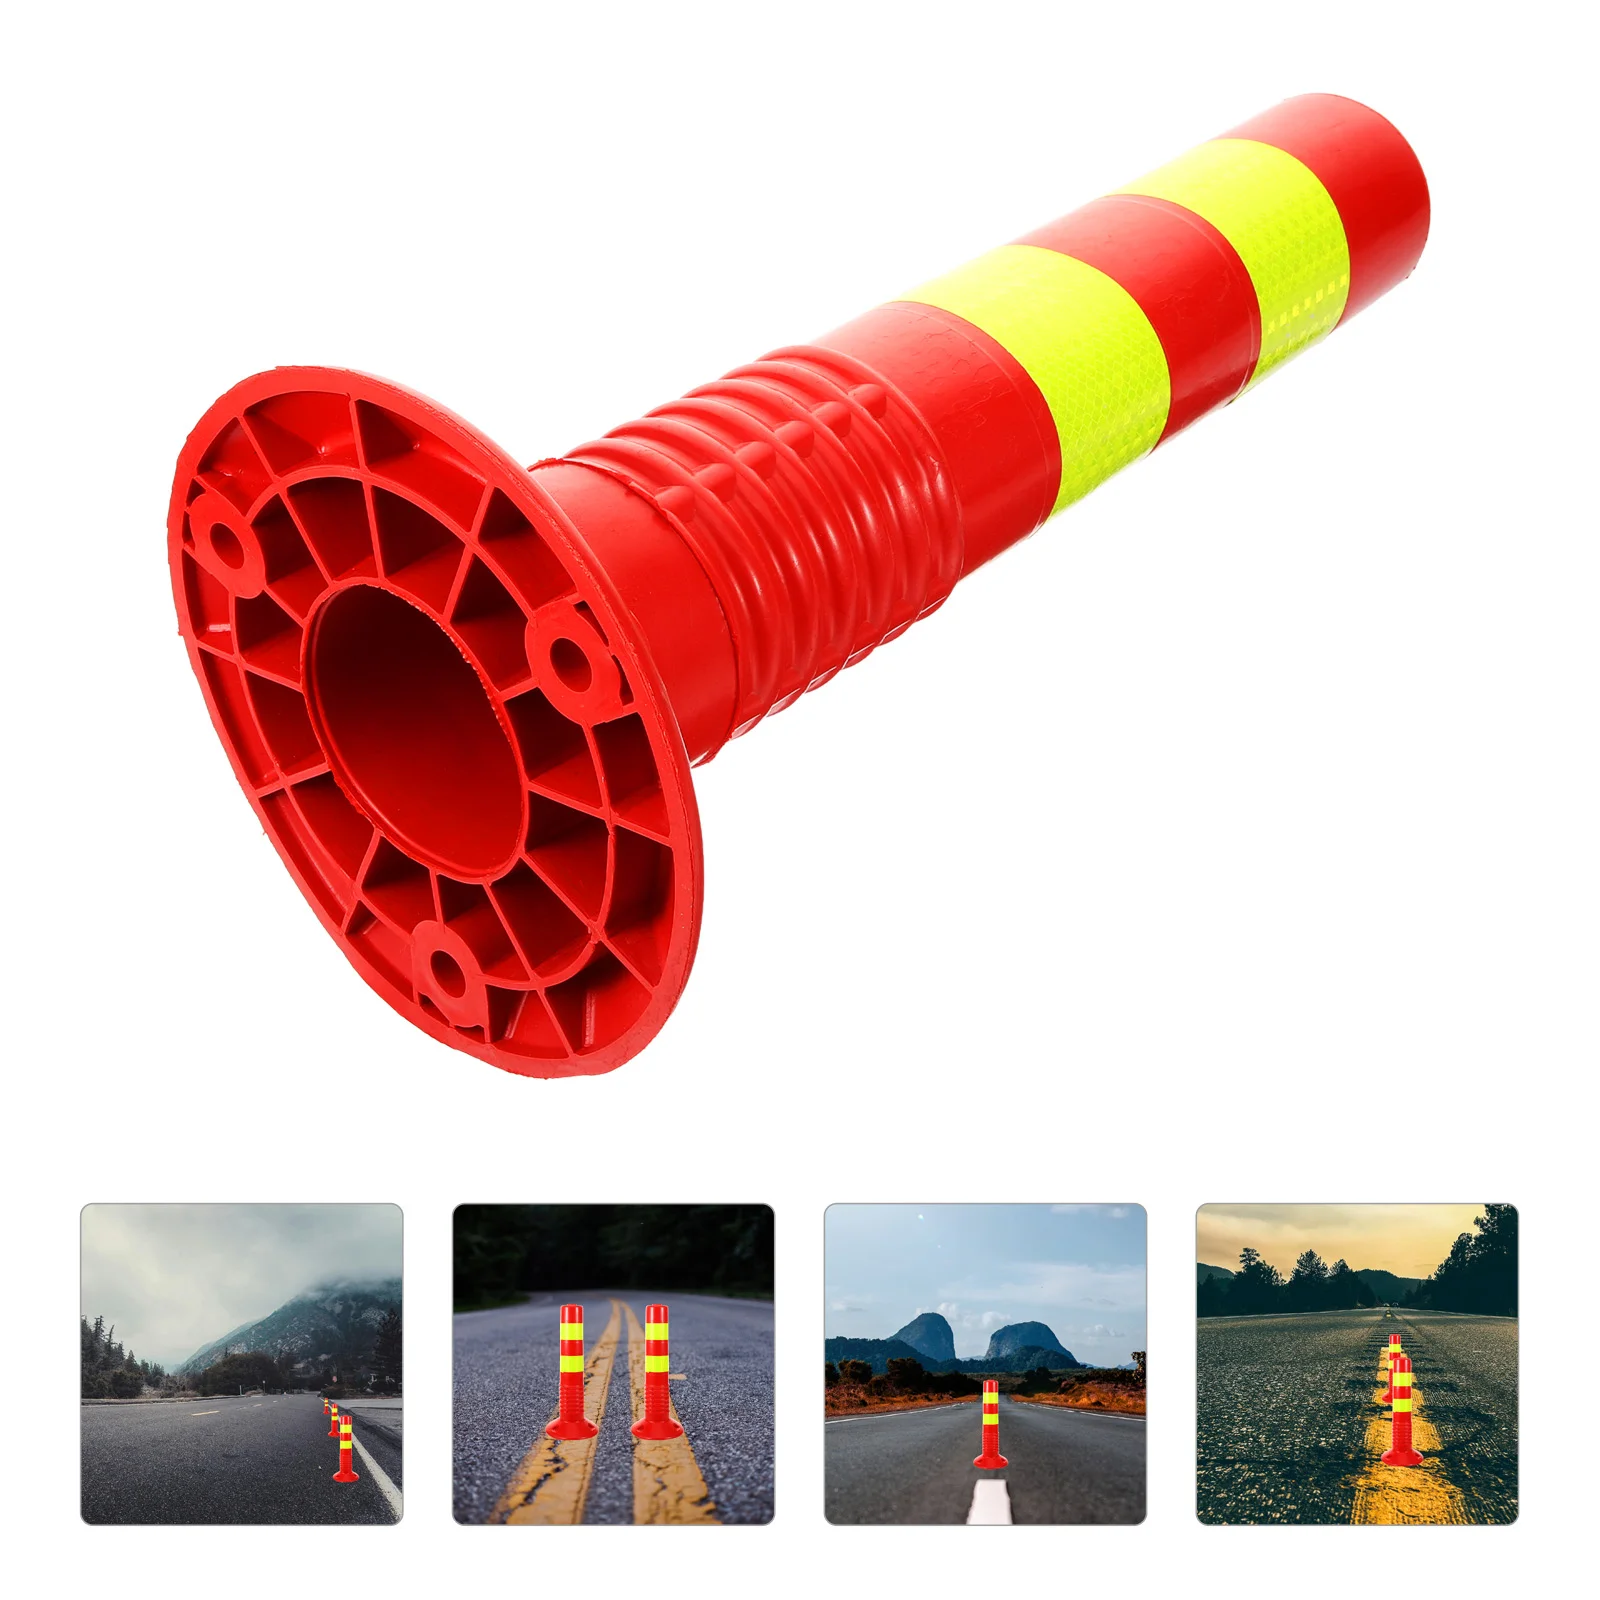 

Driveway Security Post Safety Warning Column Parking Barrier Traffic Column Security Barrier